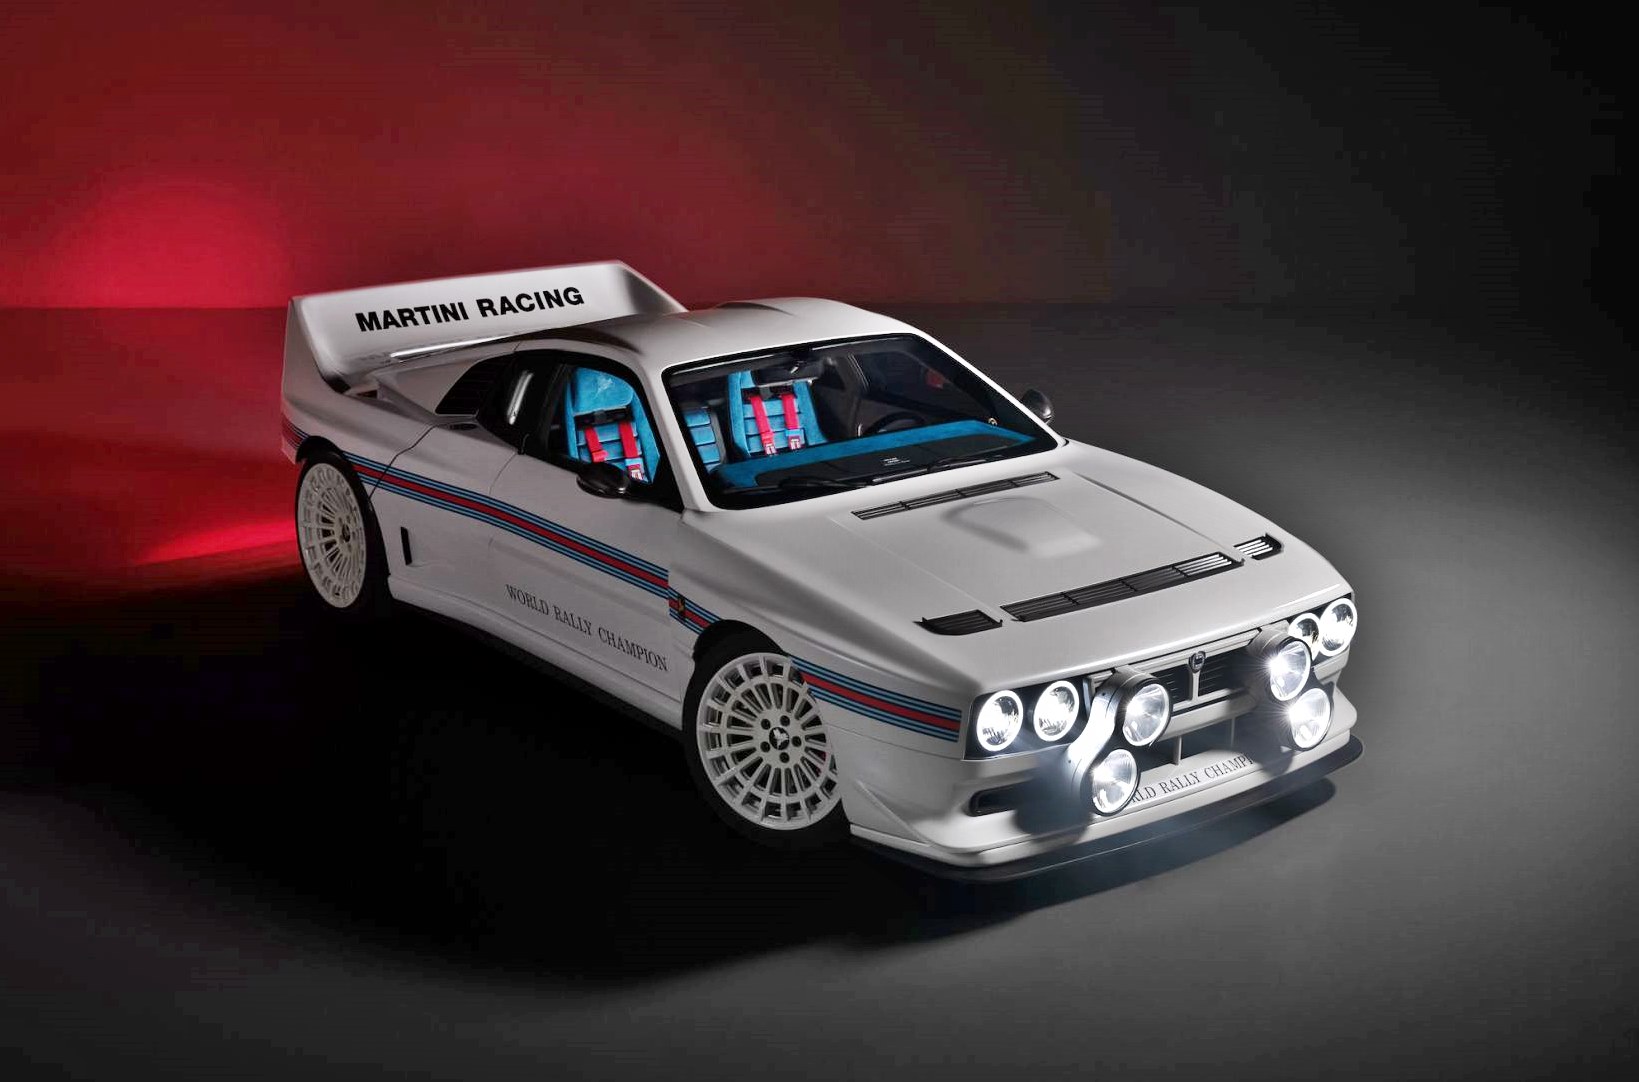 a tribute to the martini racing team’s 7 wrc titles with lancia